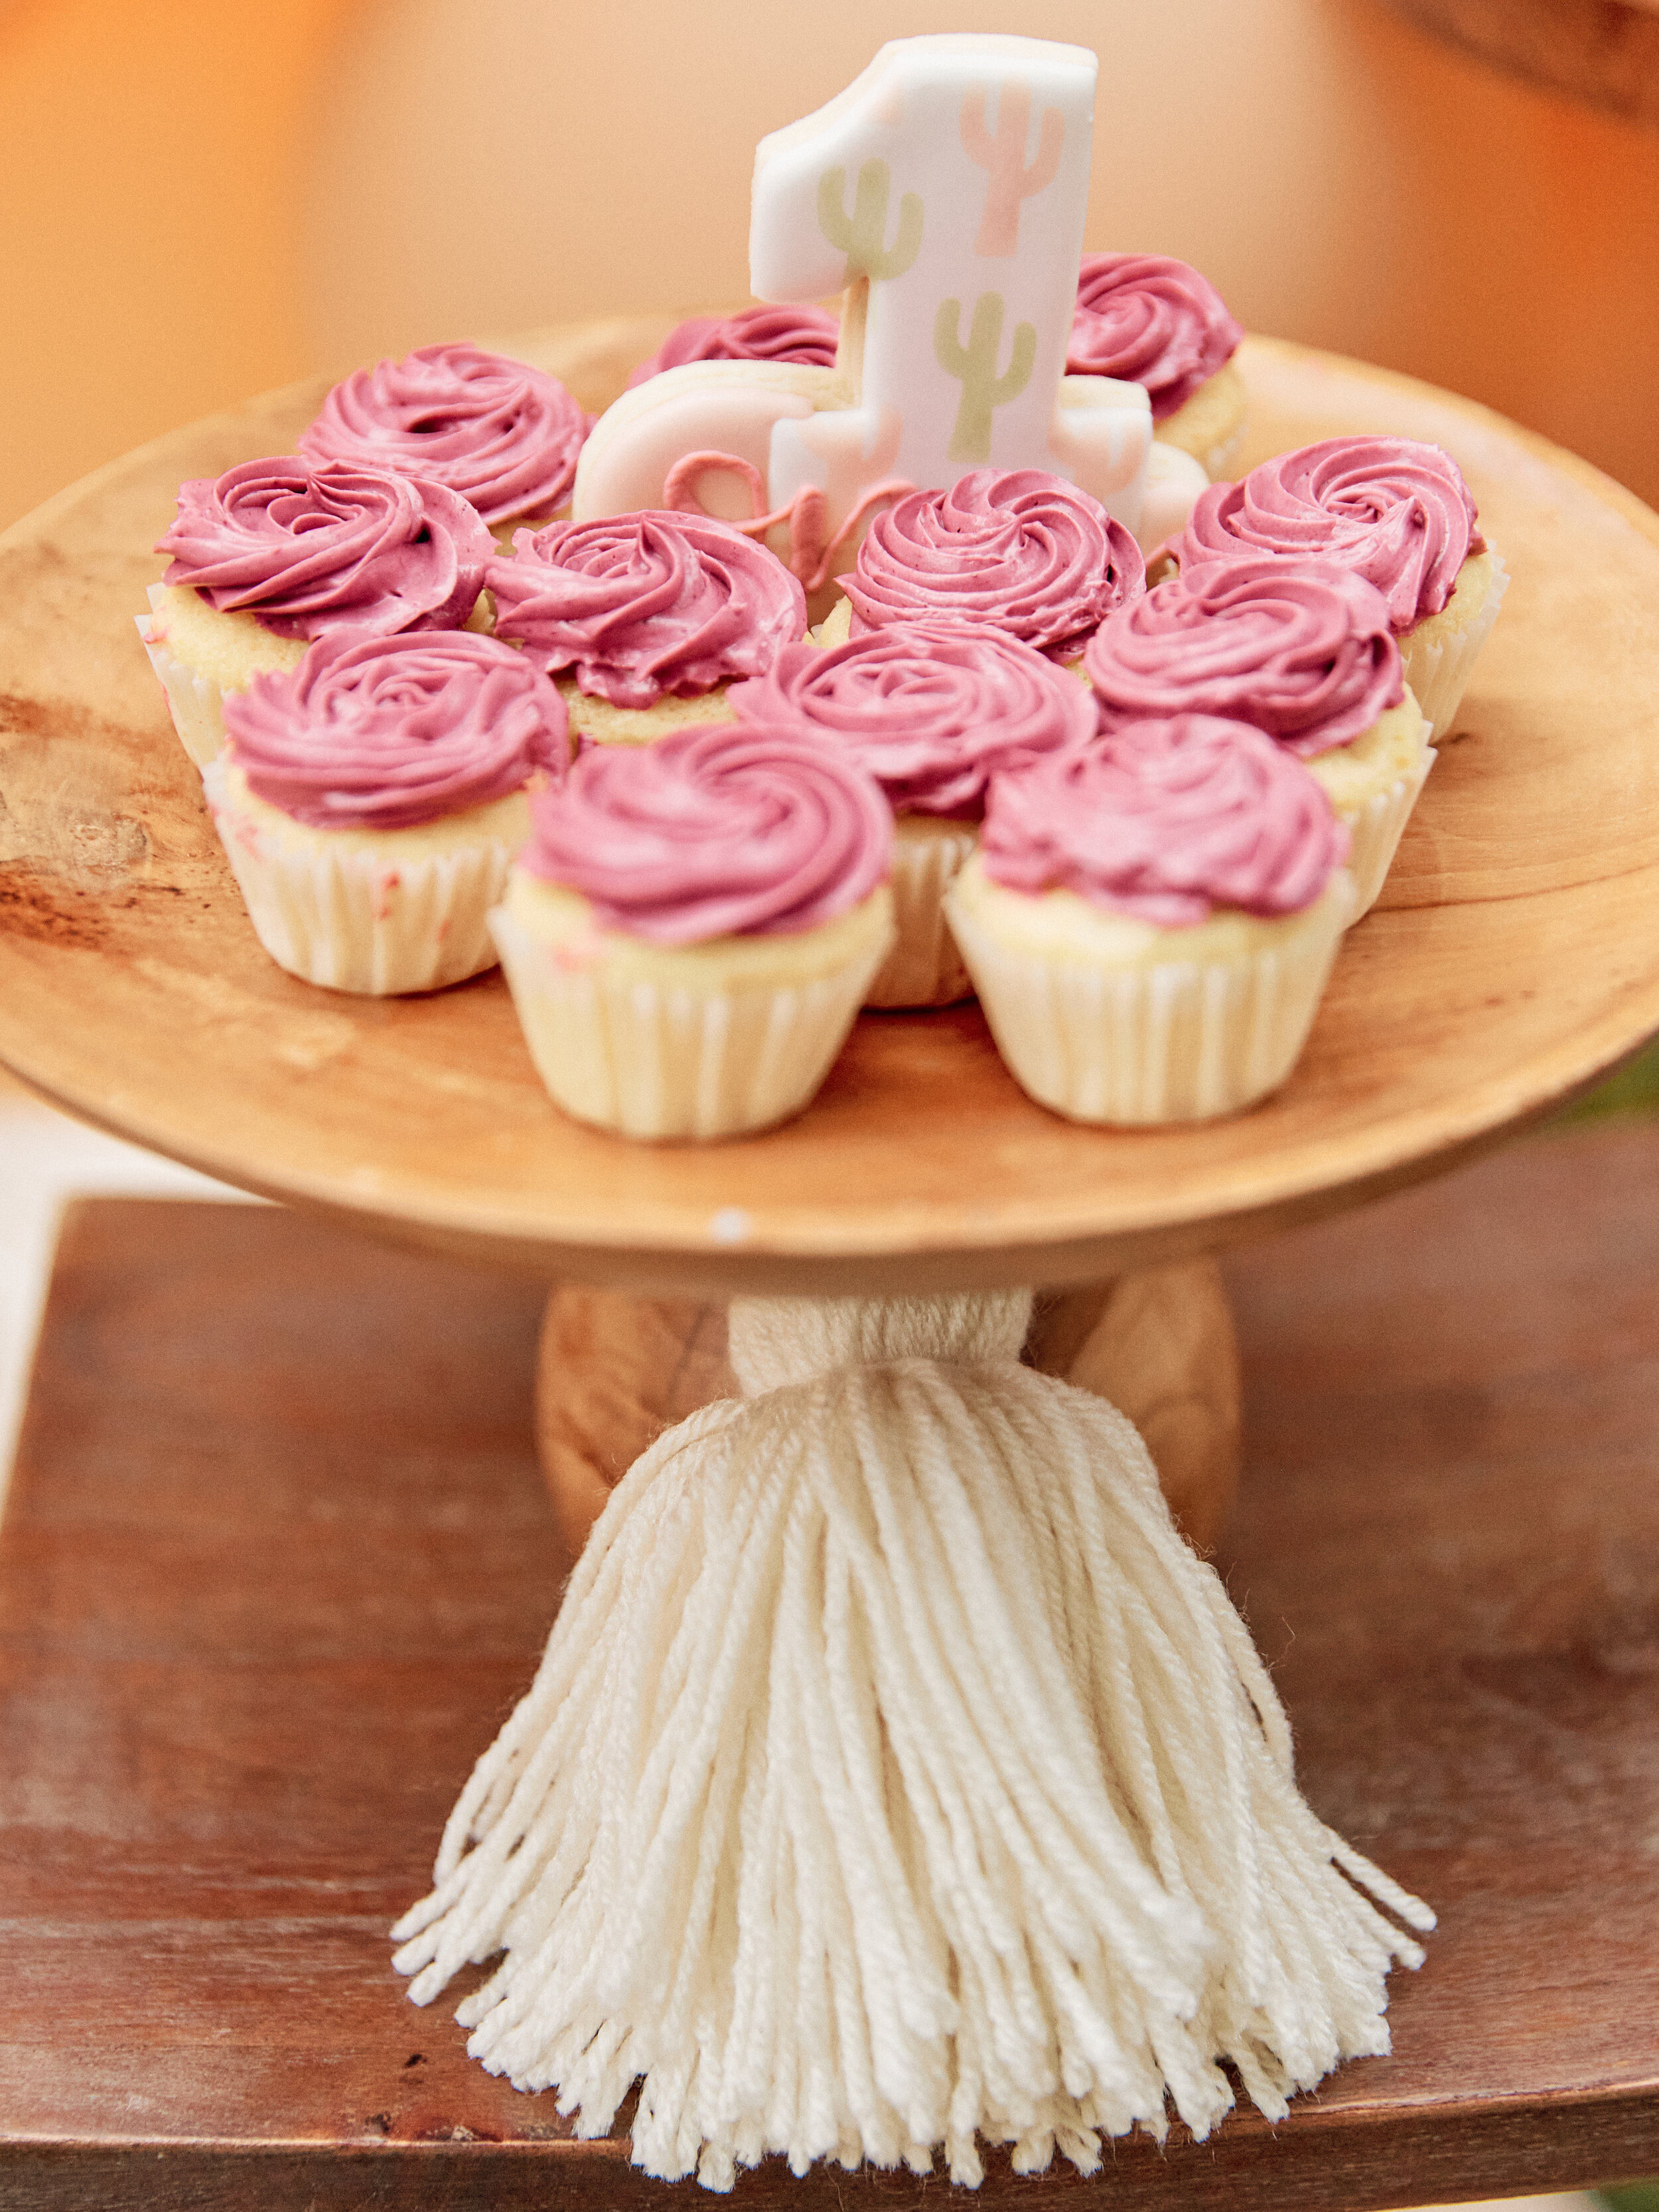 Llama party desserts - get details and more party inspiration now at minteventdesign.com!